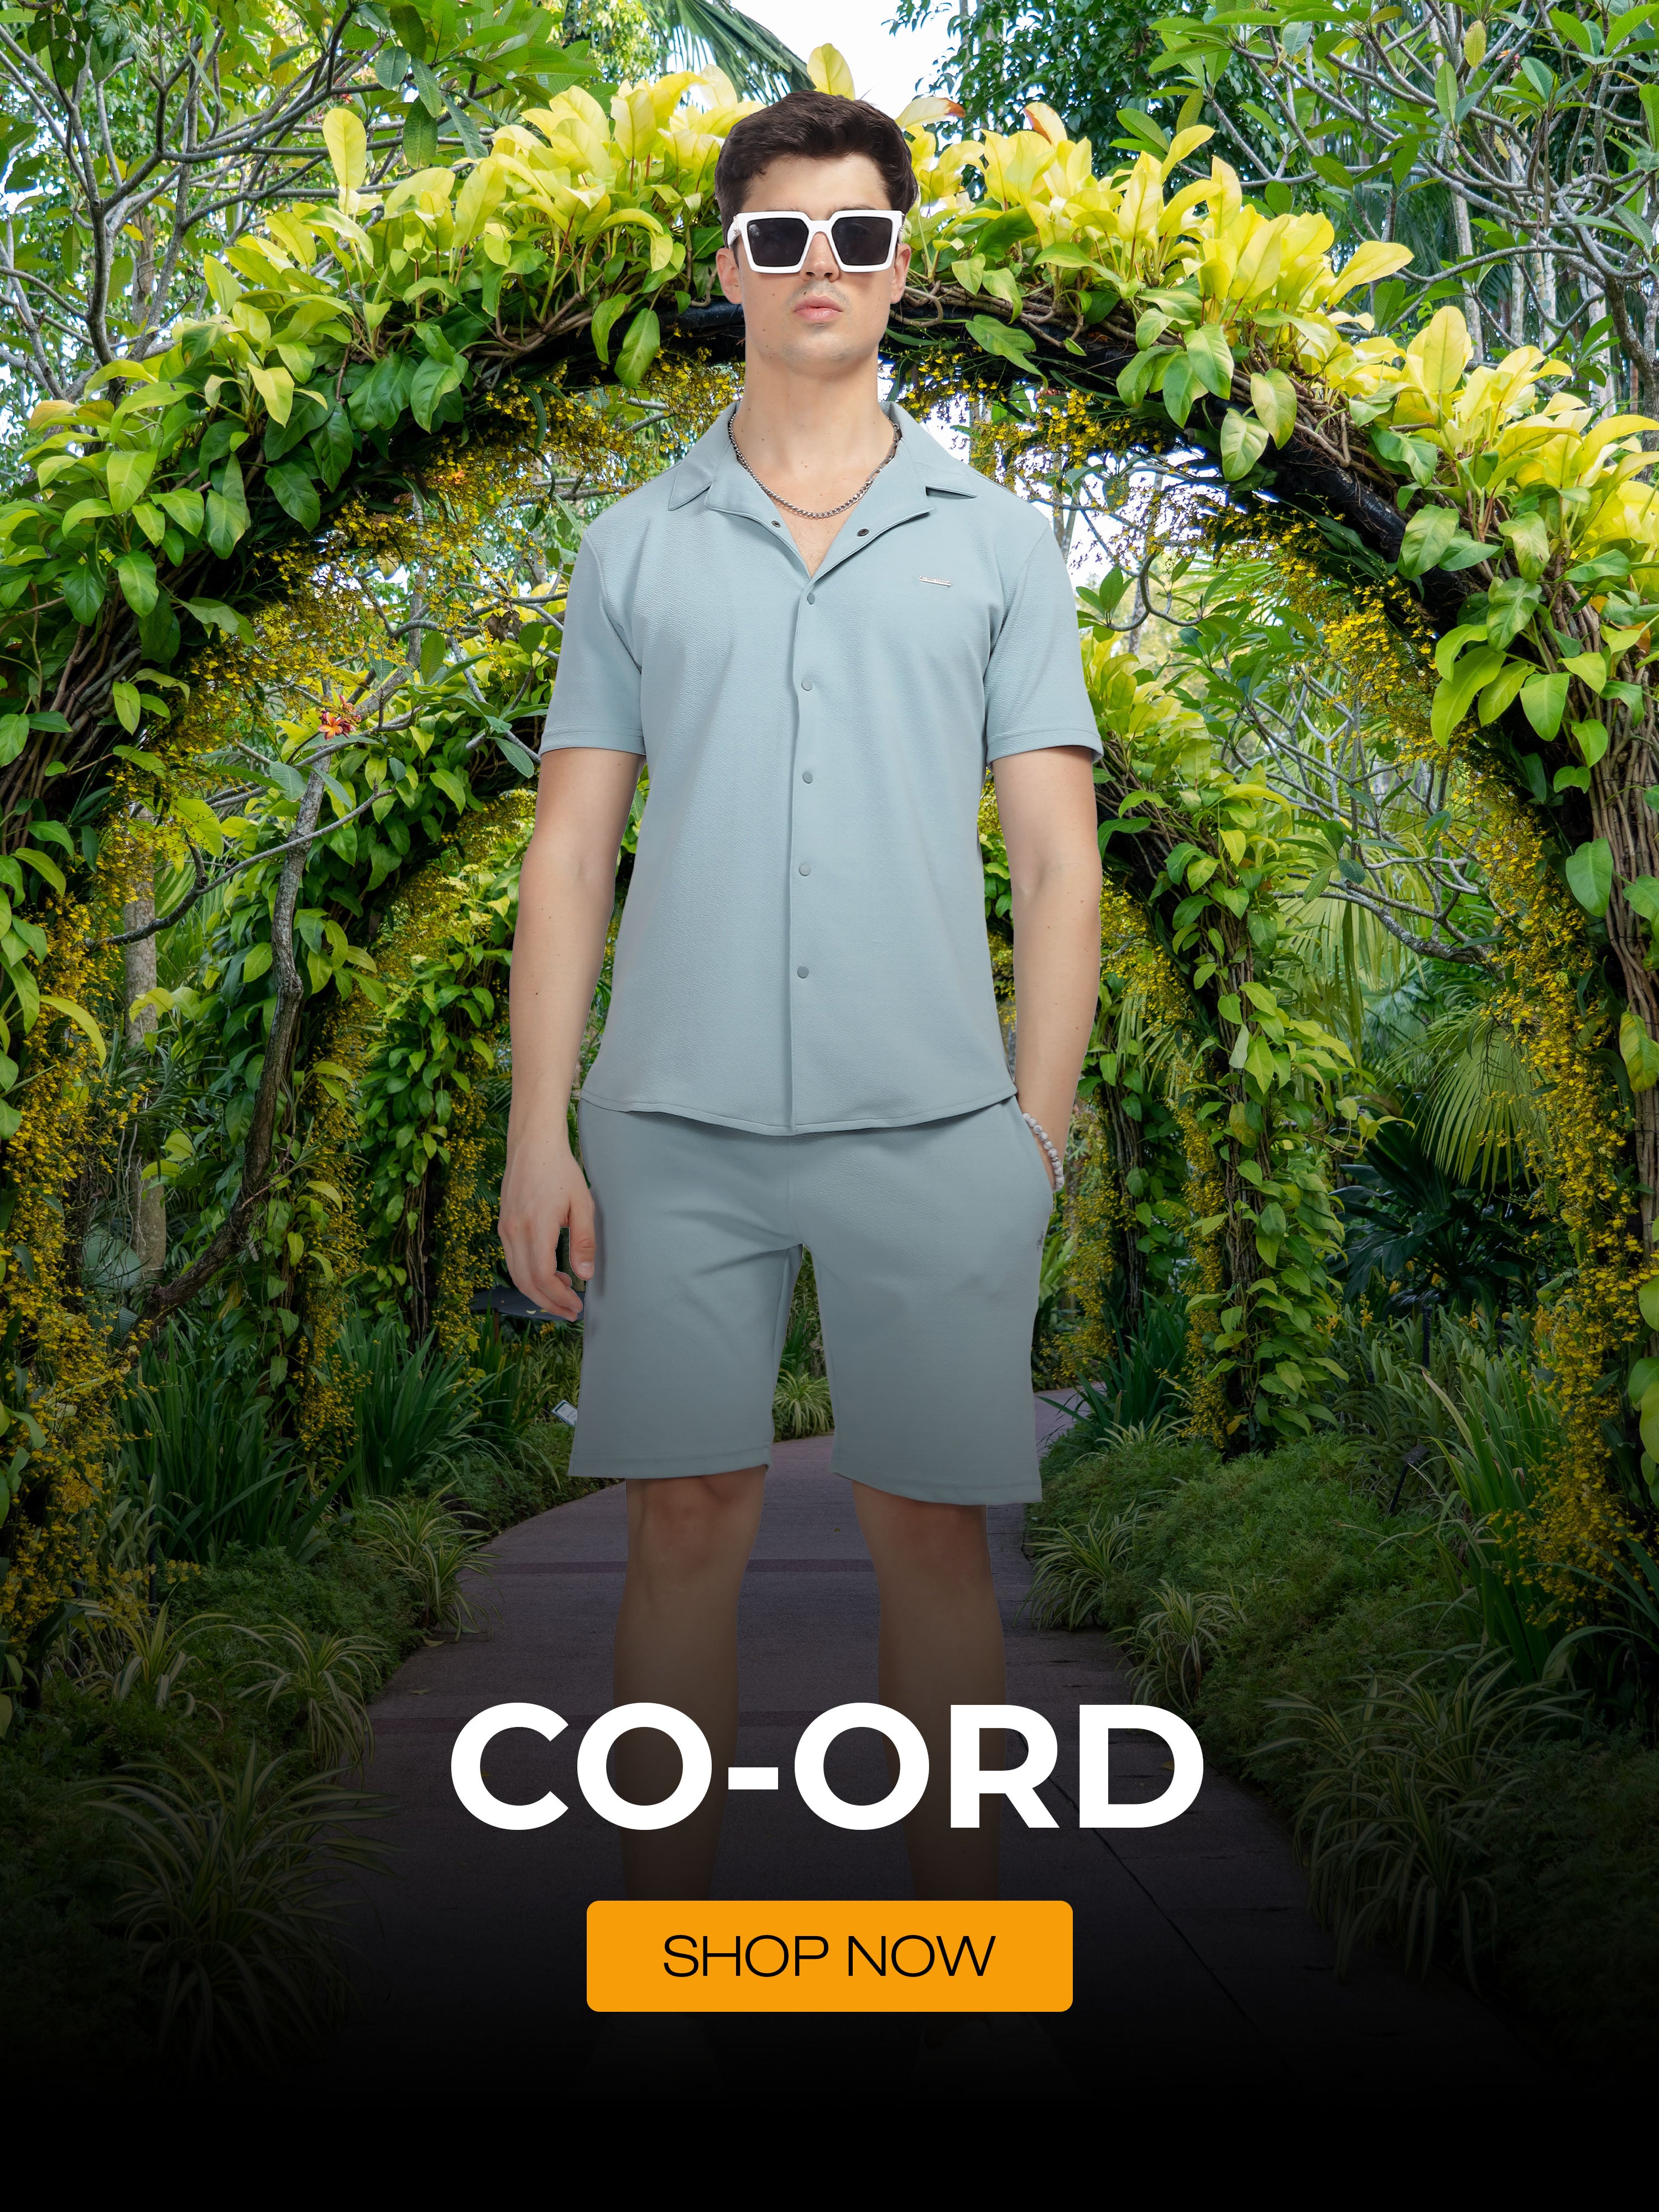 Co-ord